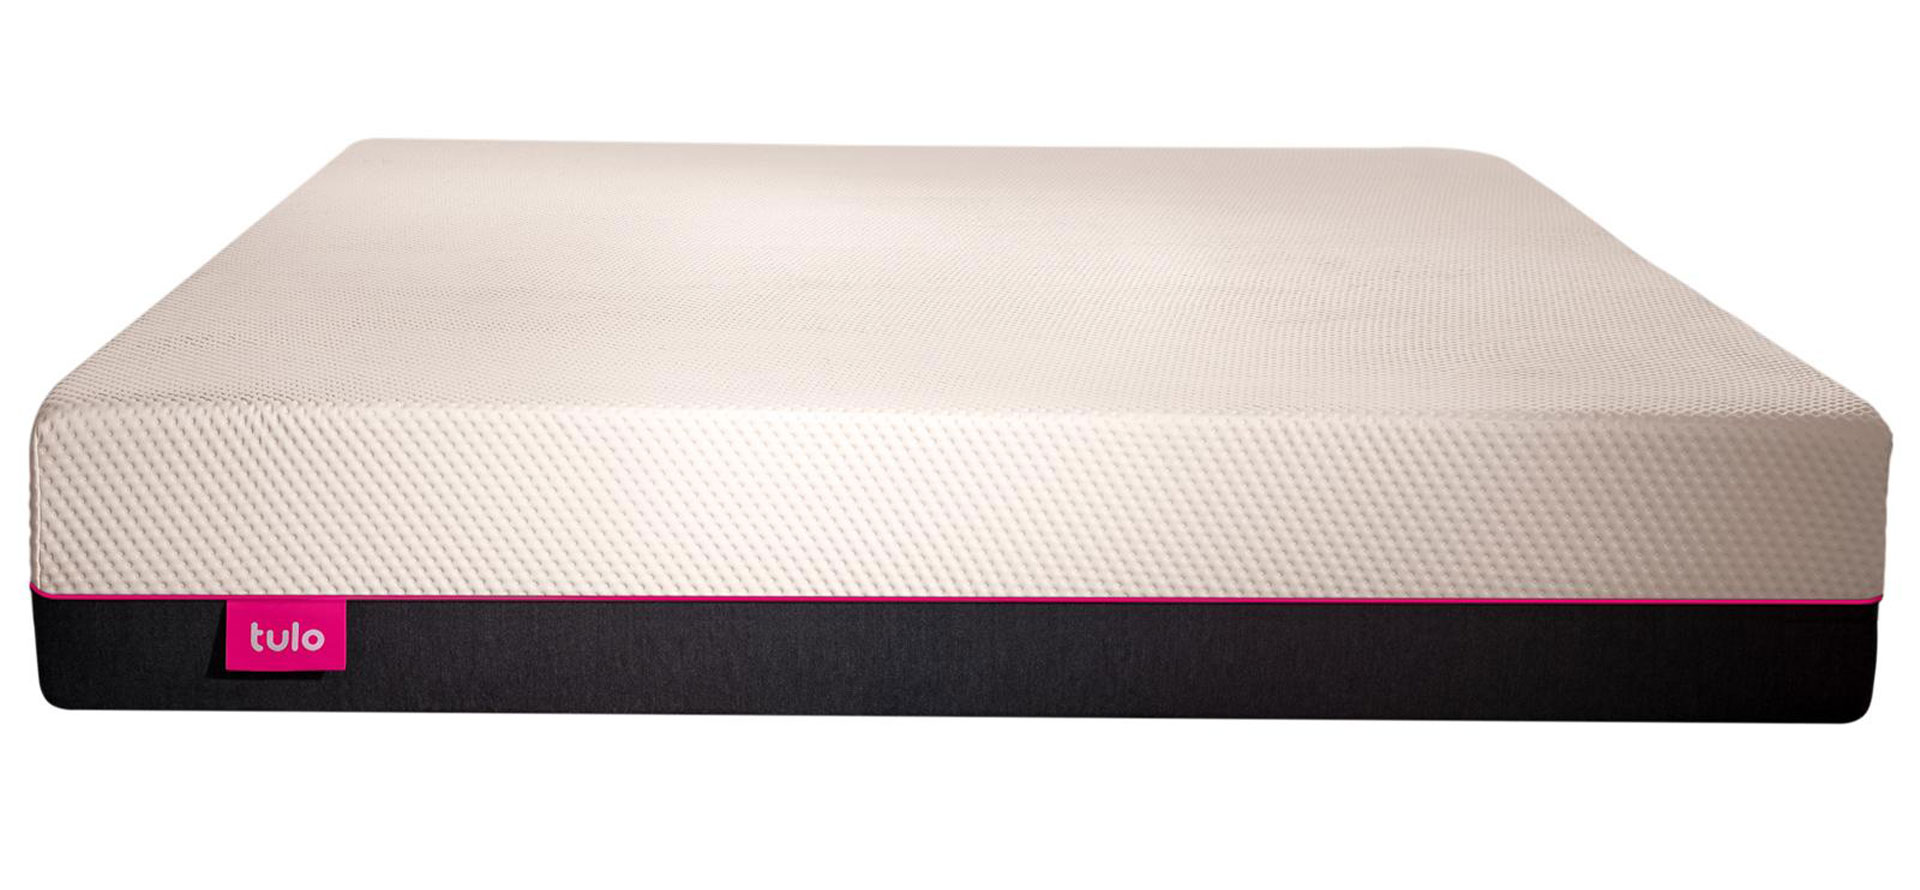 Tulo mattress review.